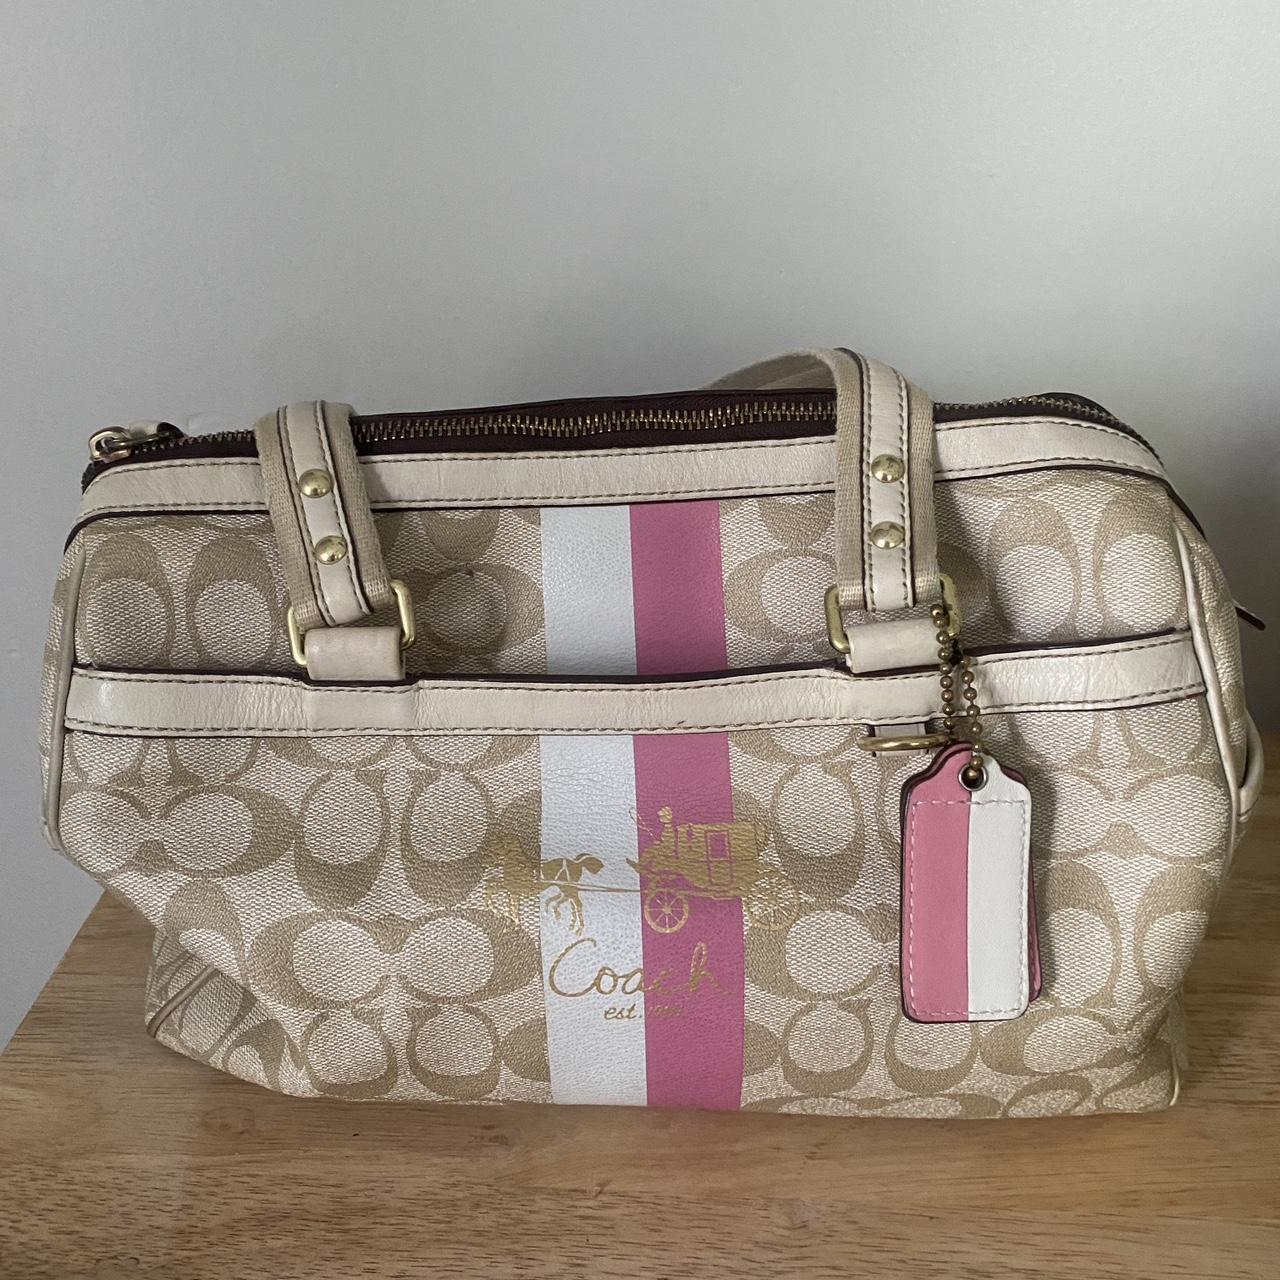 Elevate your style with this elegant Coach Heritage - Depop